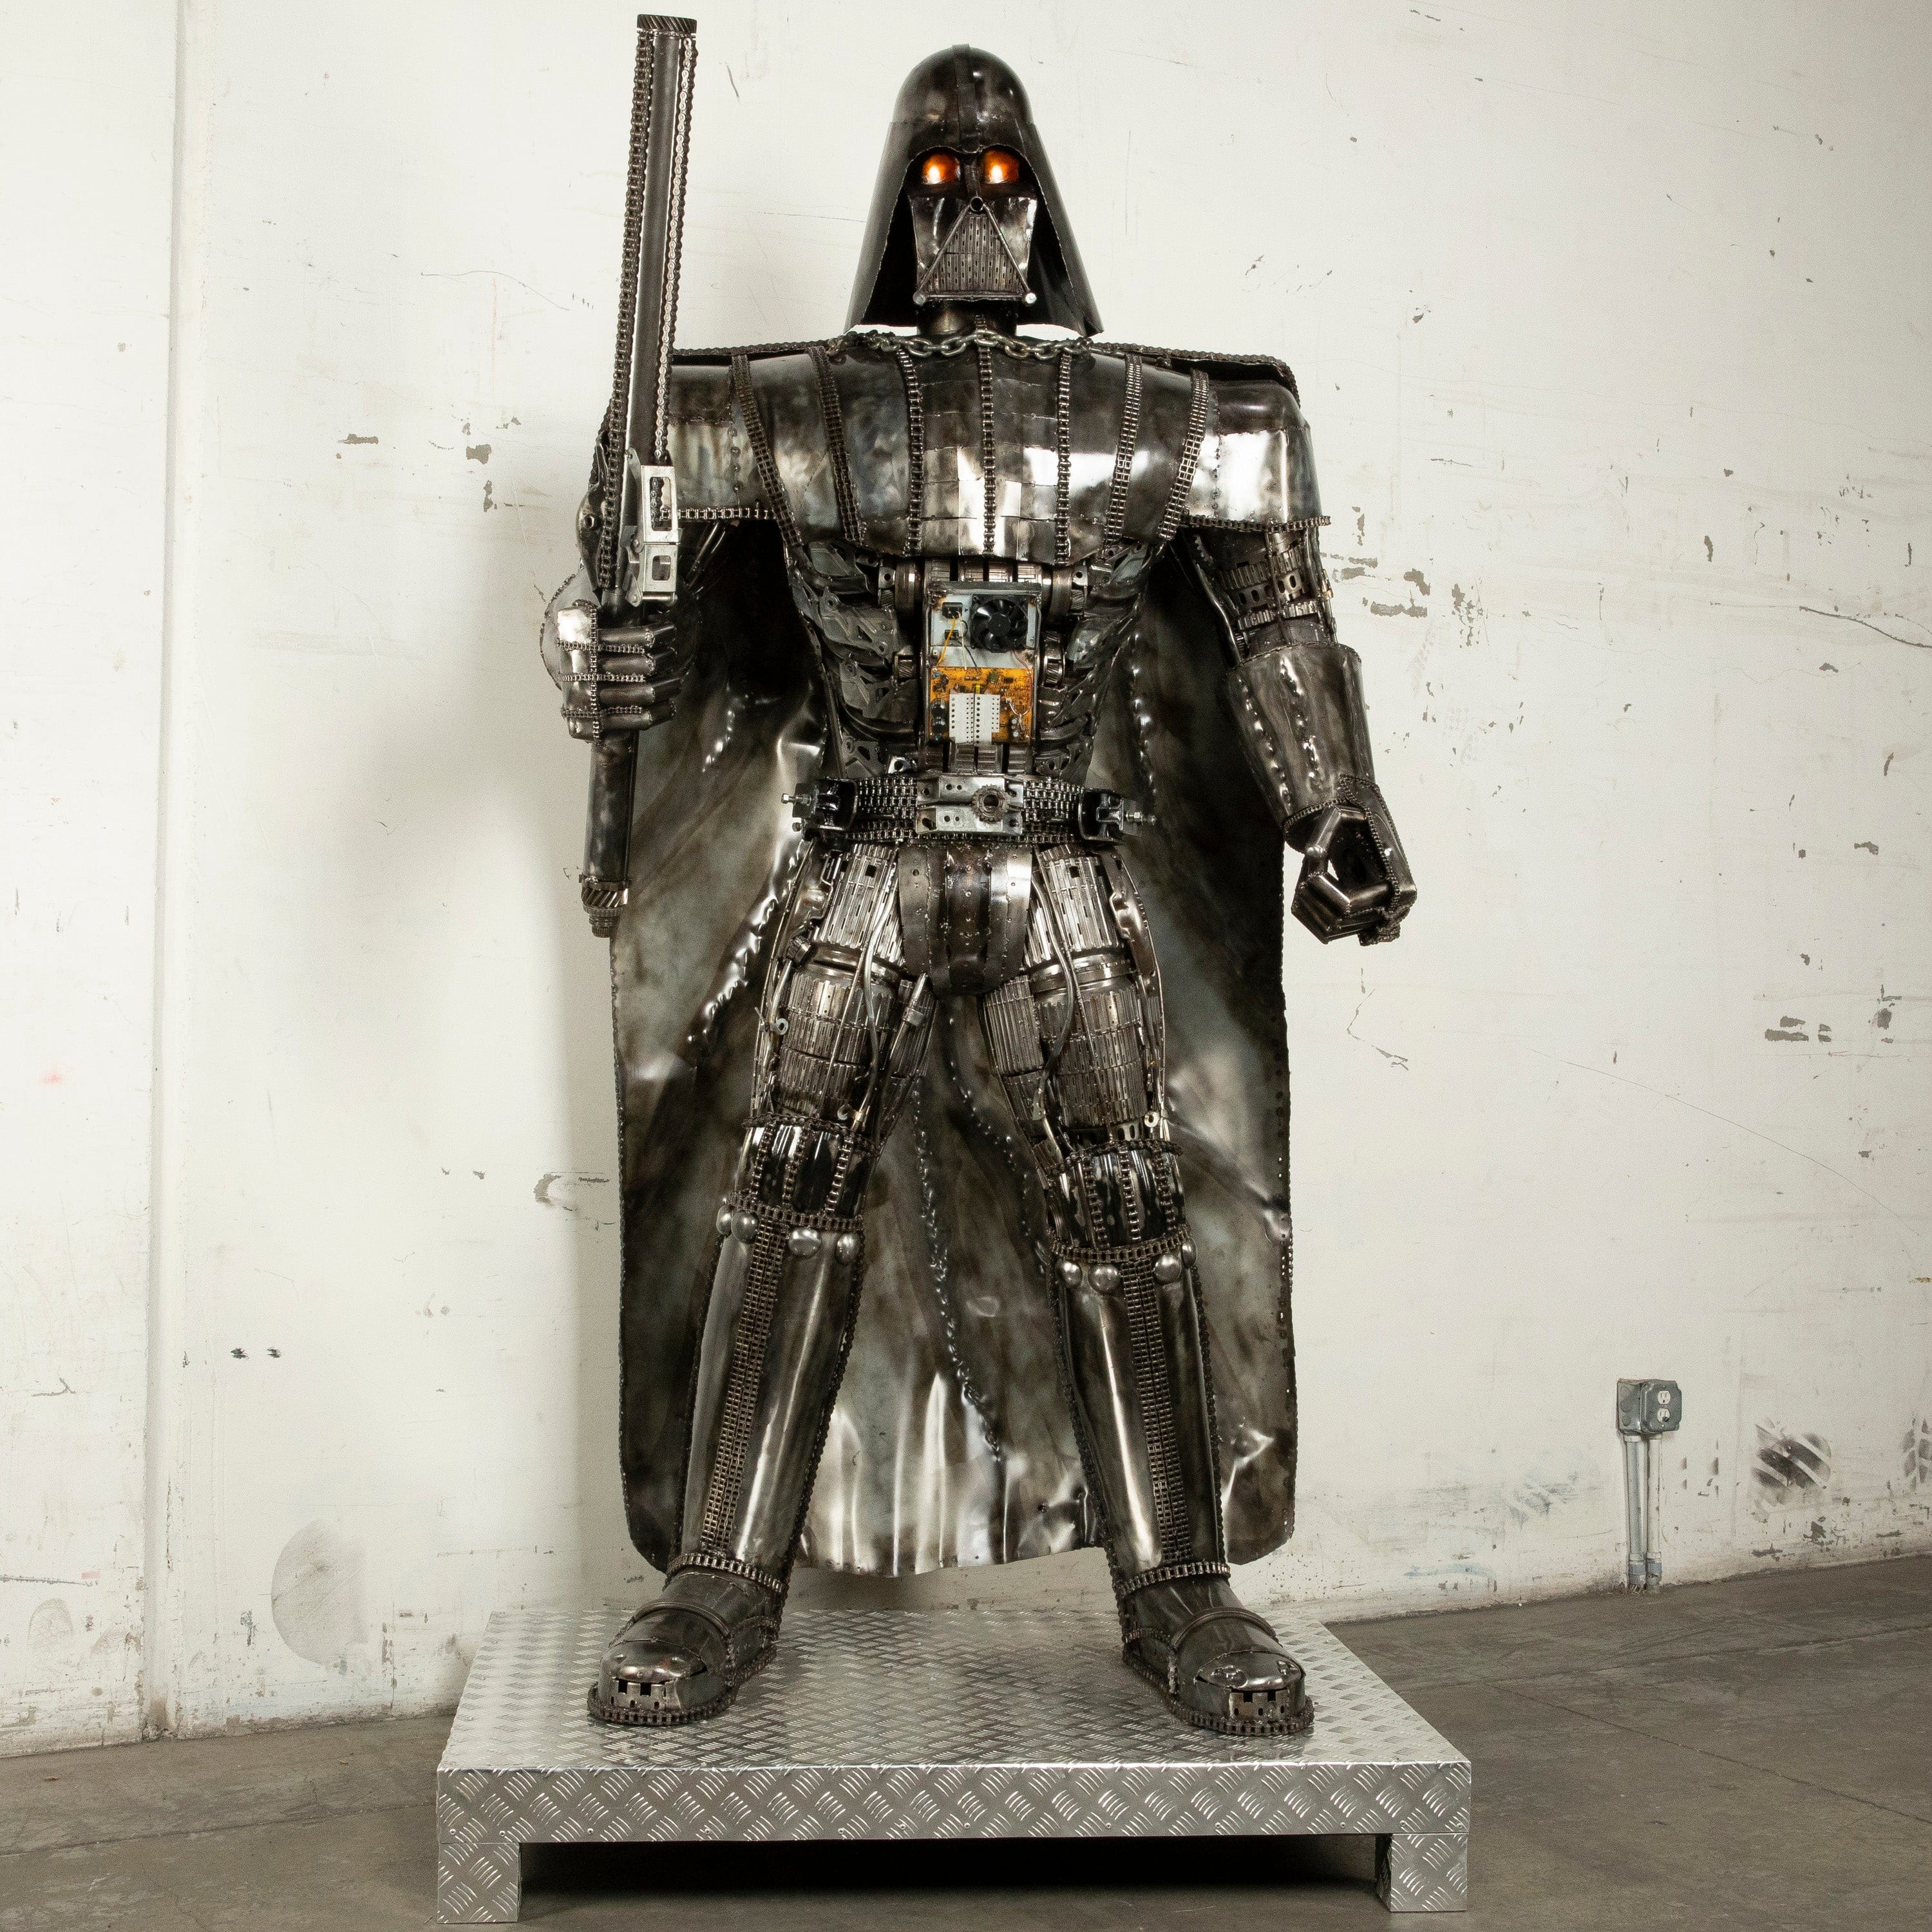 Kalifano Recycled Metal Art 91" Darth Vader Inspired Recycled Metal Art Sculpture RMS-DV230-S04